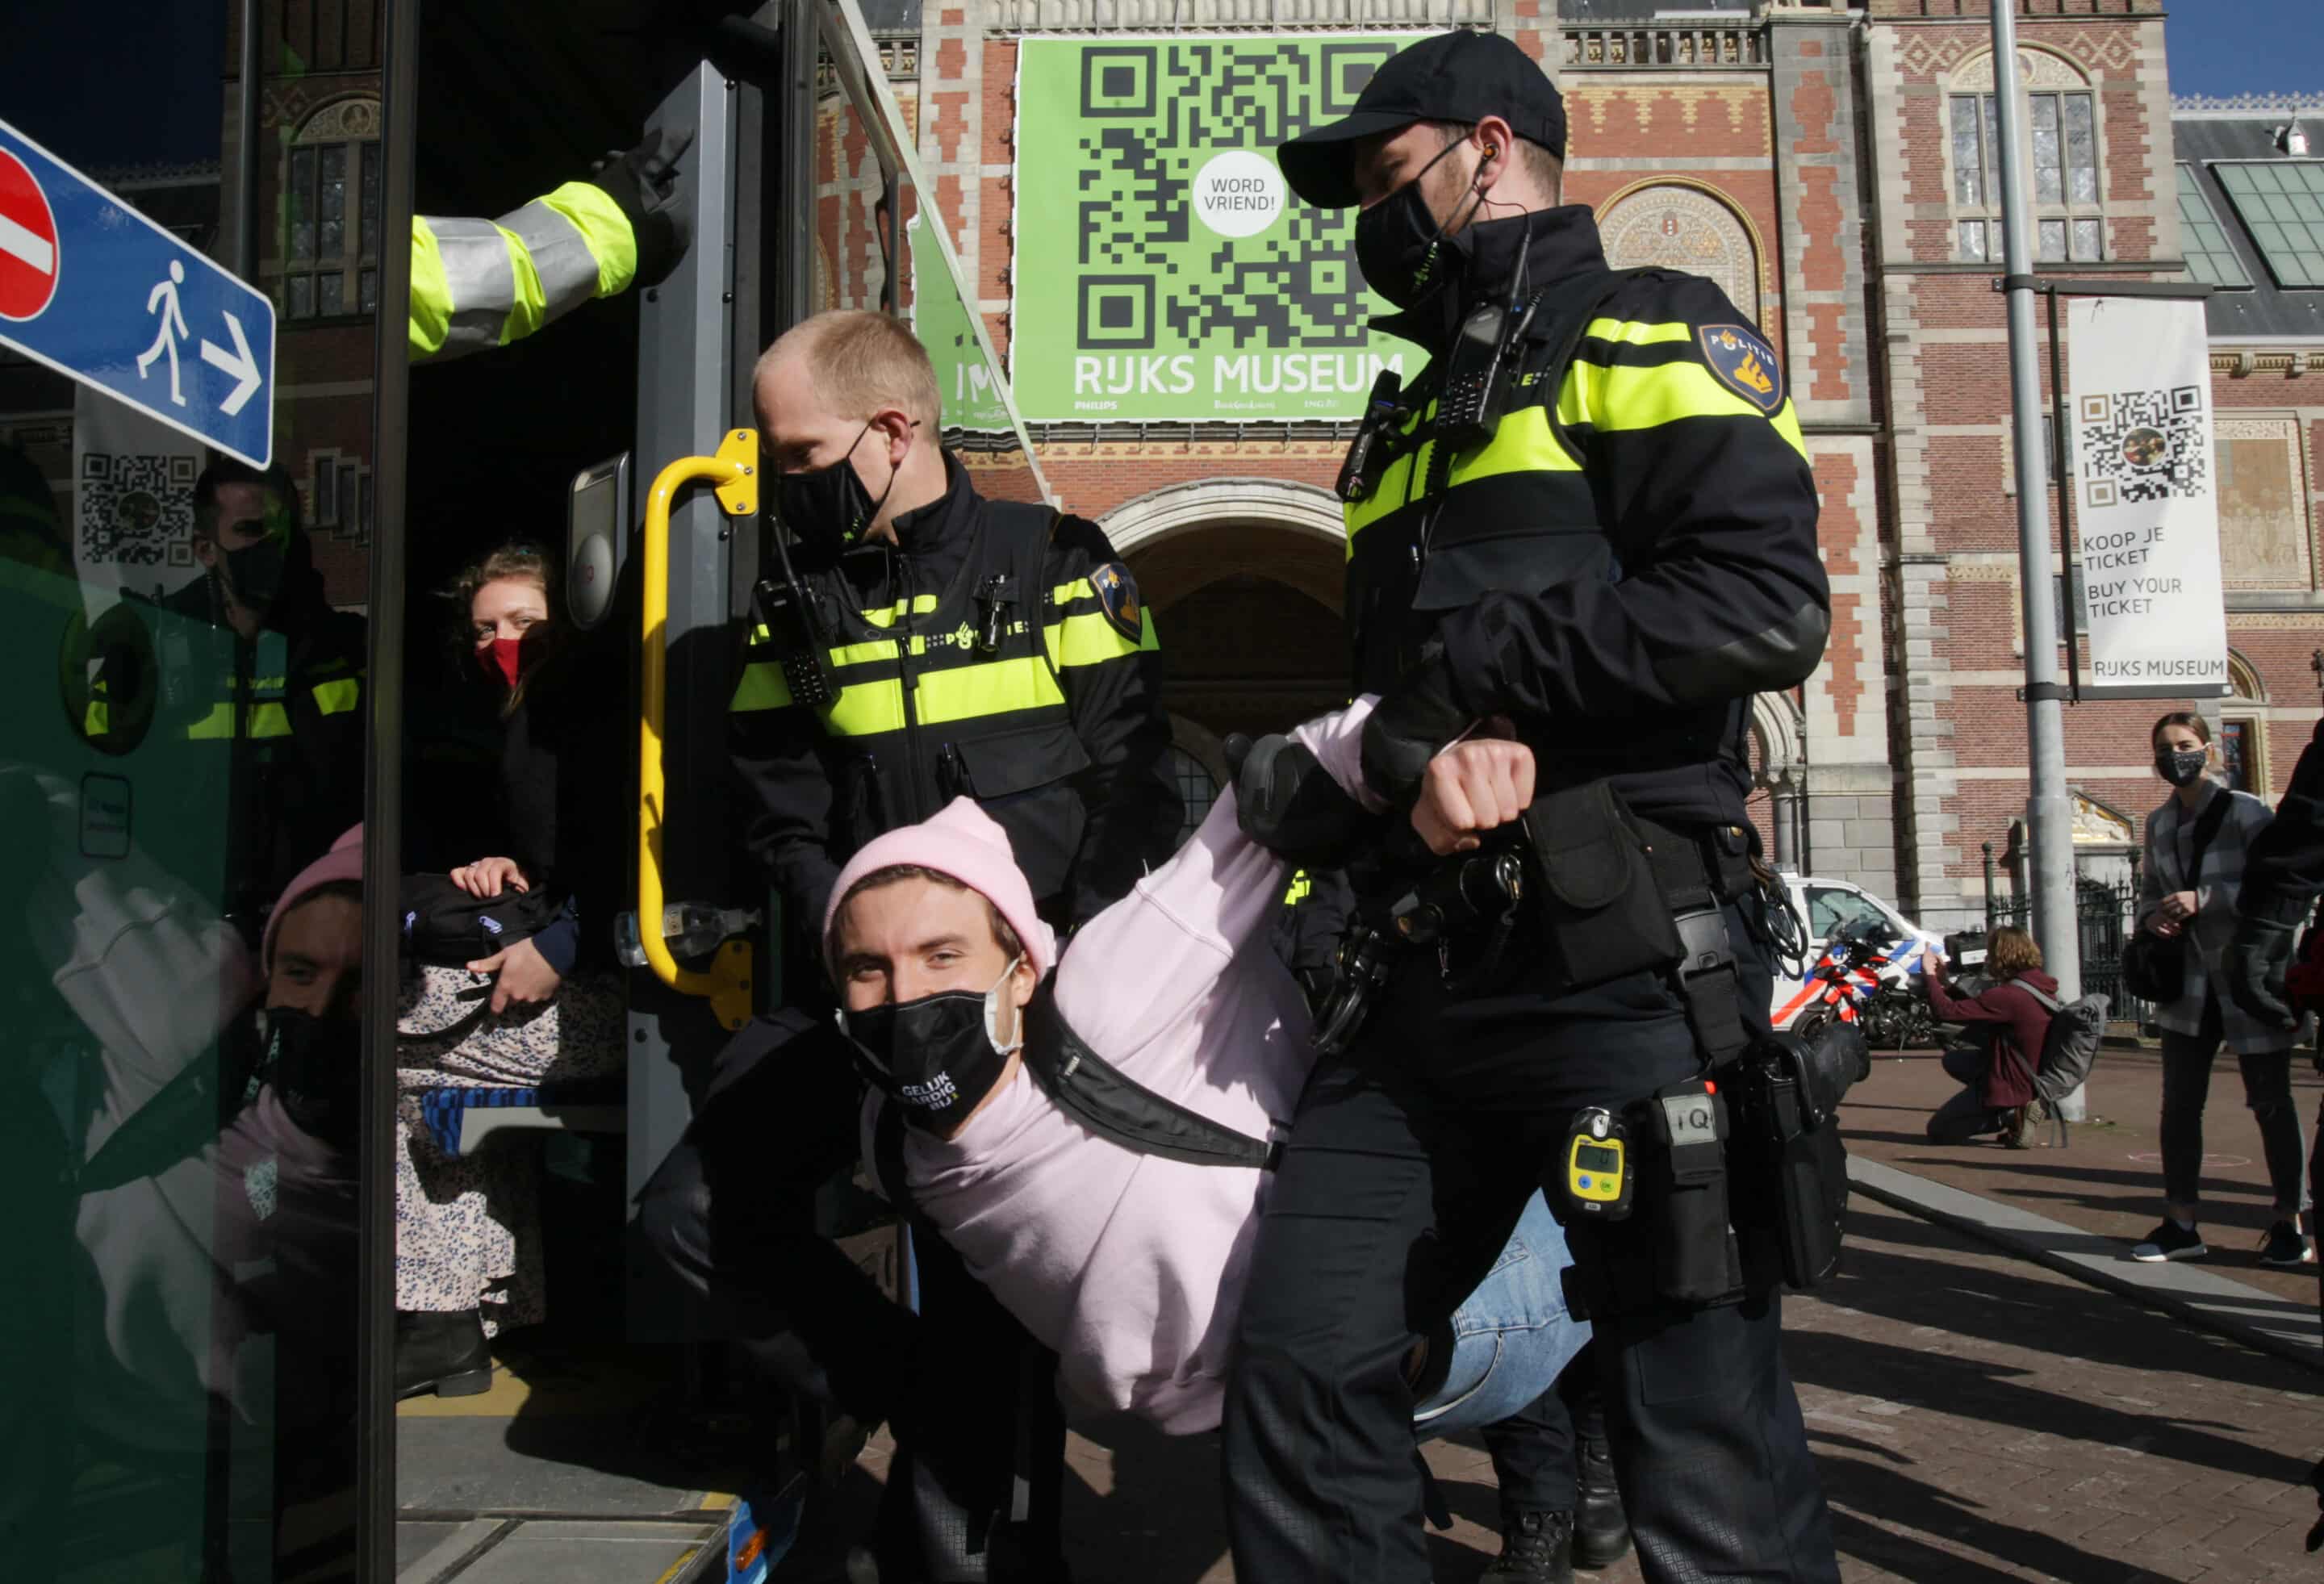 An Extinction Rebellion environmental activist is arrested by Dutch police officers during protest block the main entrance of the Rijksmuseum on February 26, 2021. (Photo by Paulo Amorim/Sipa USA)/32441888/PA/2102261540